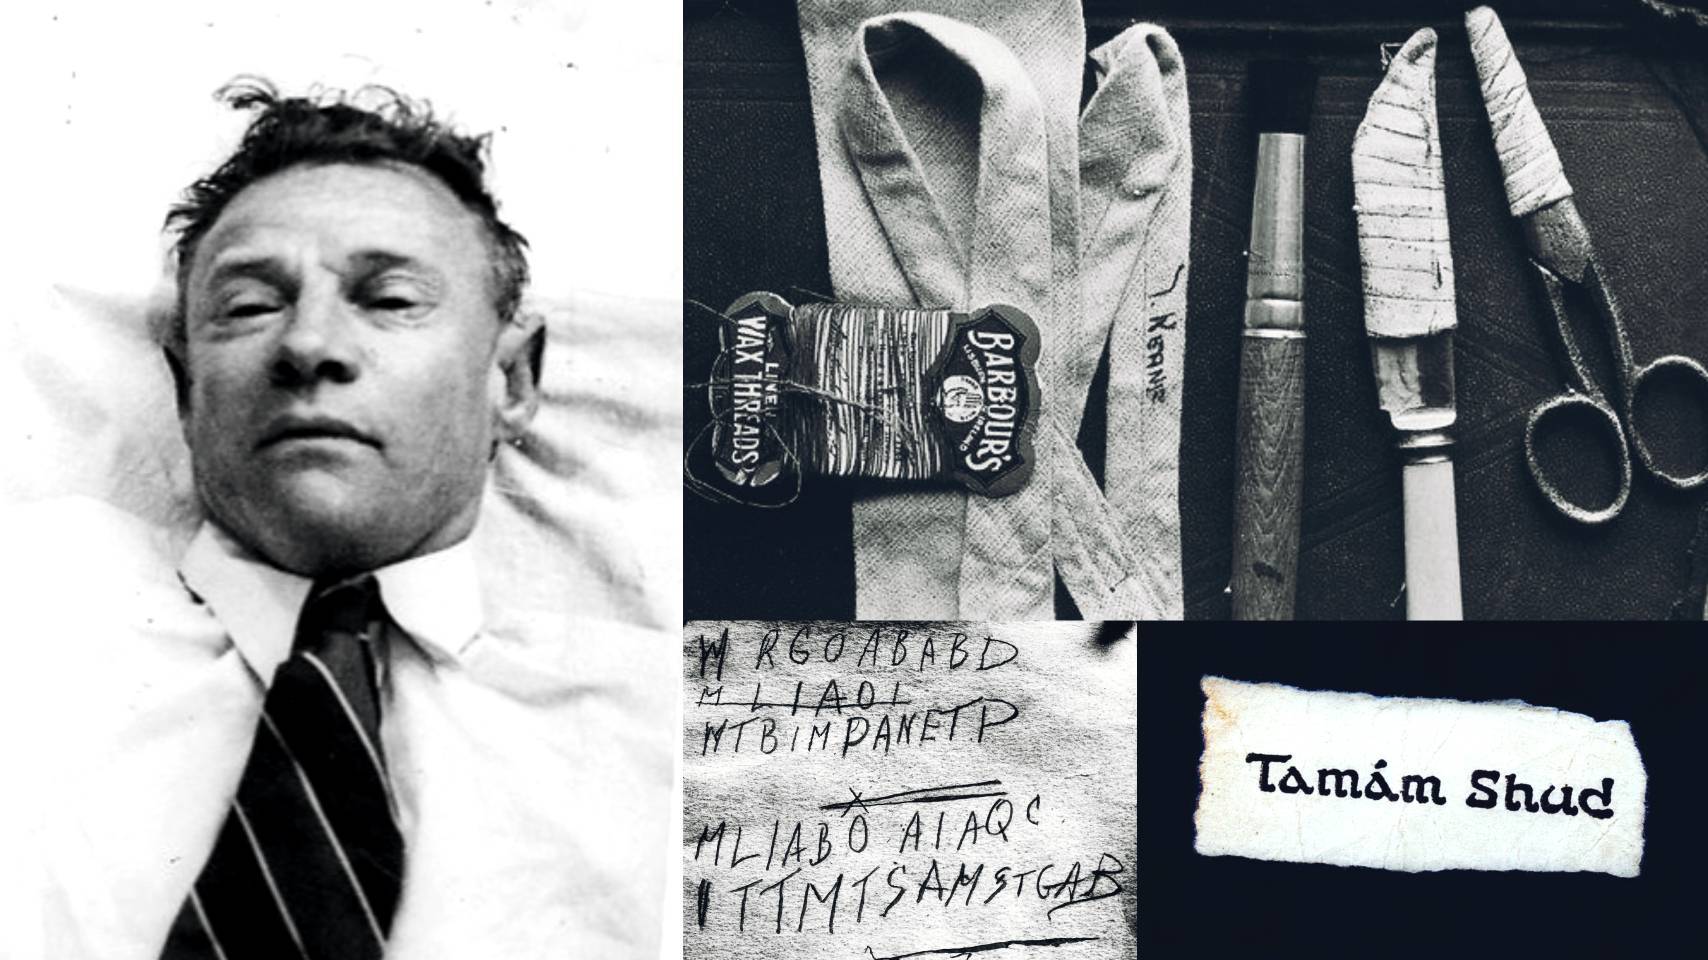 Tamám Shud – The unsolved mystery of the Somerton man 2